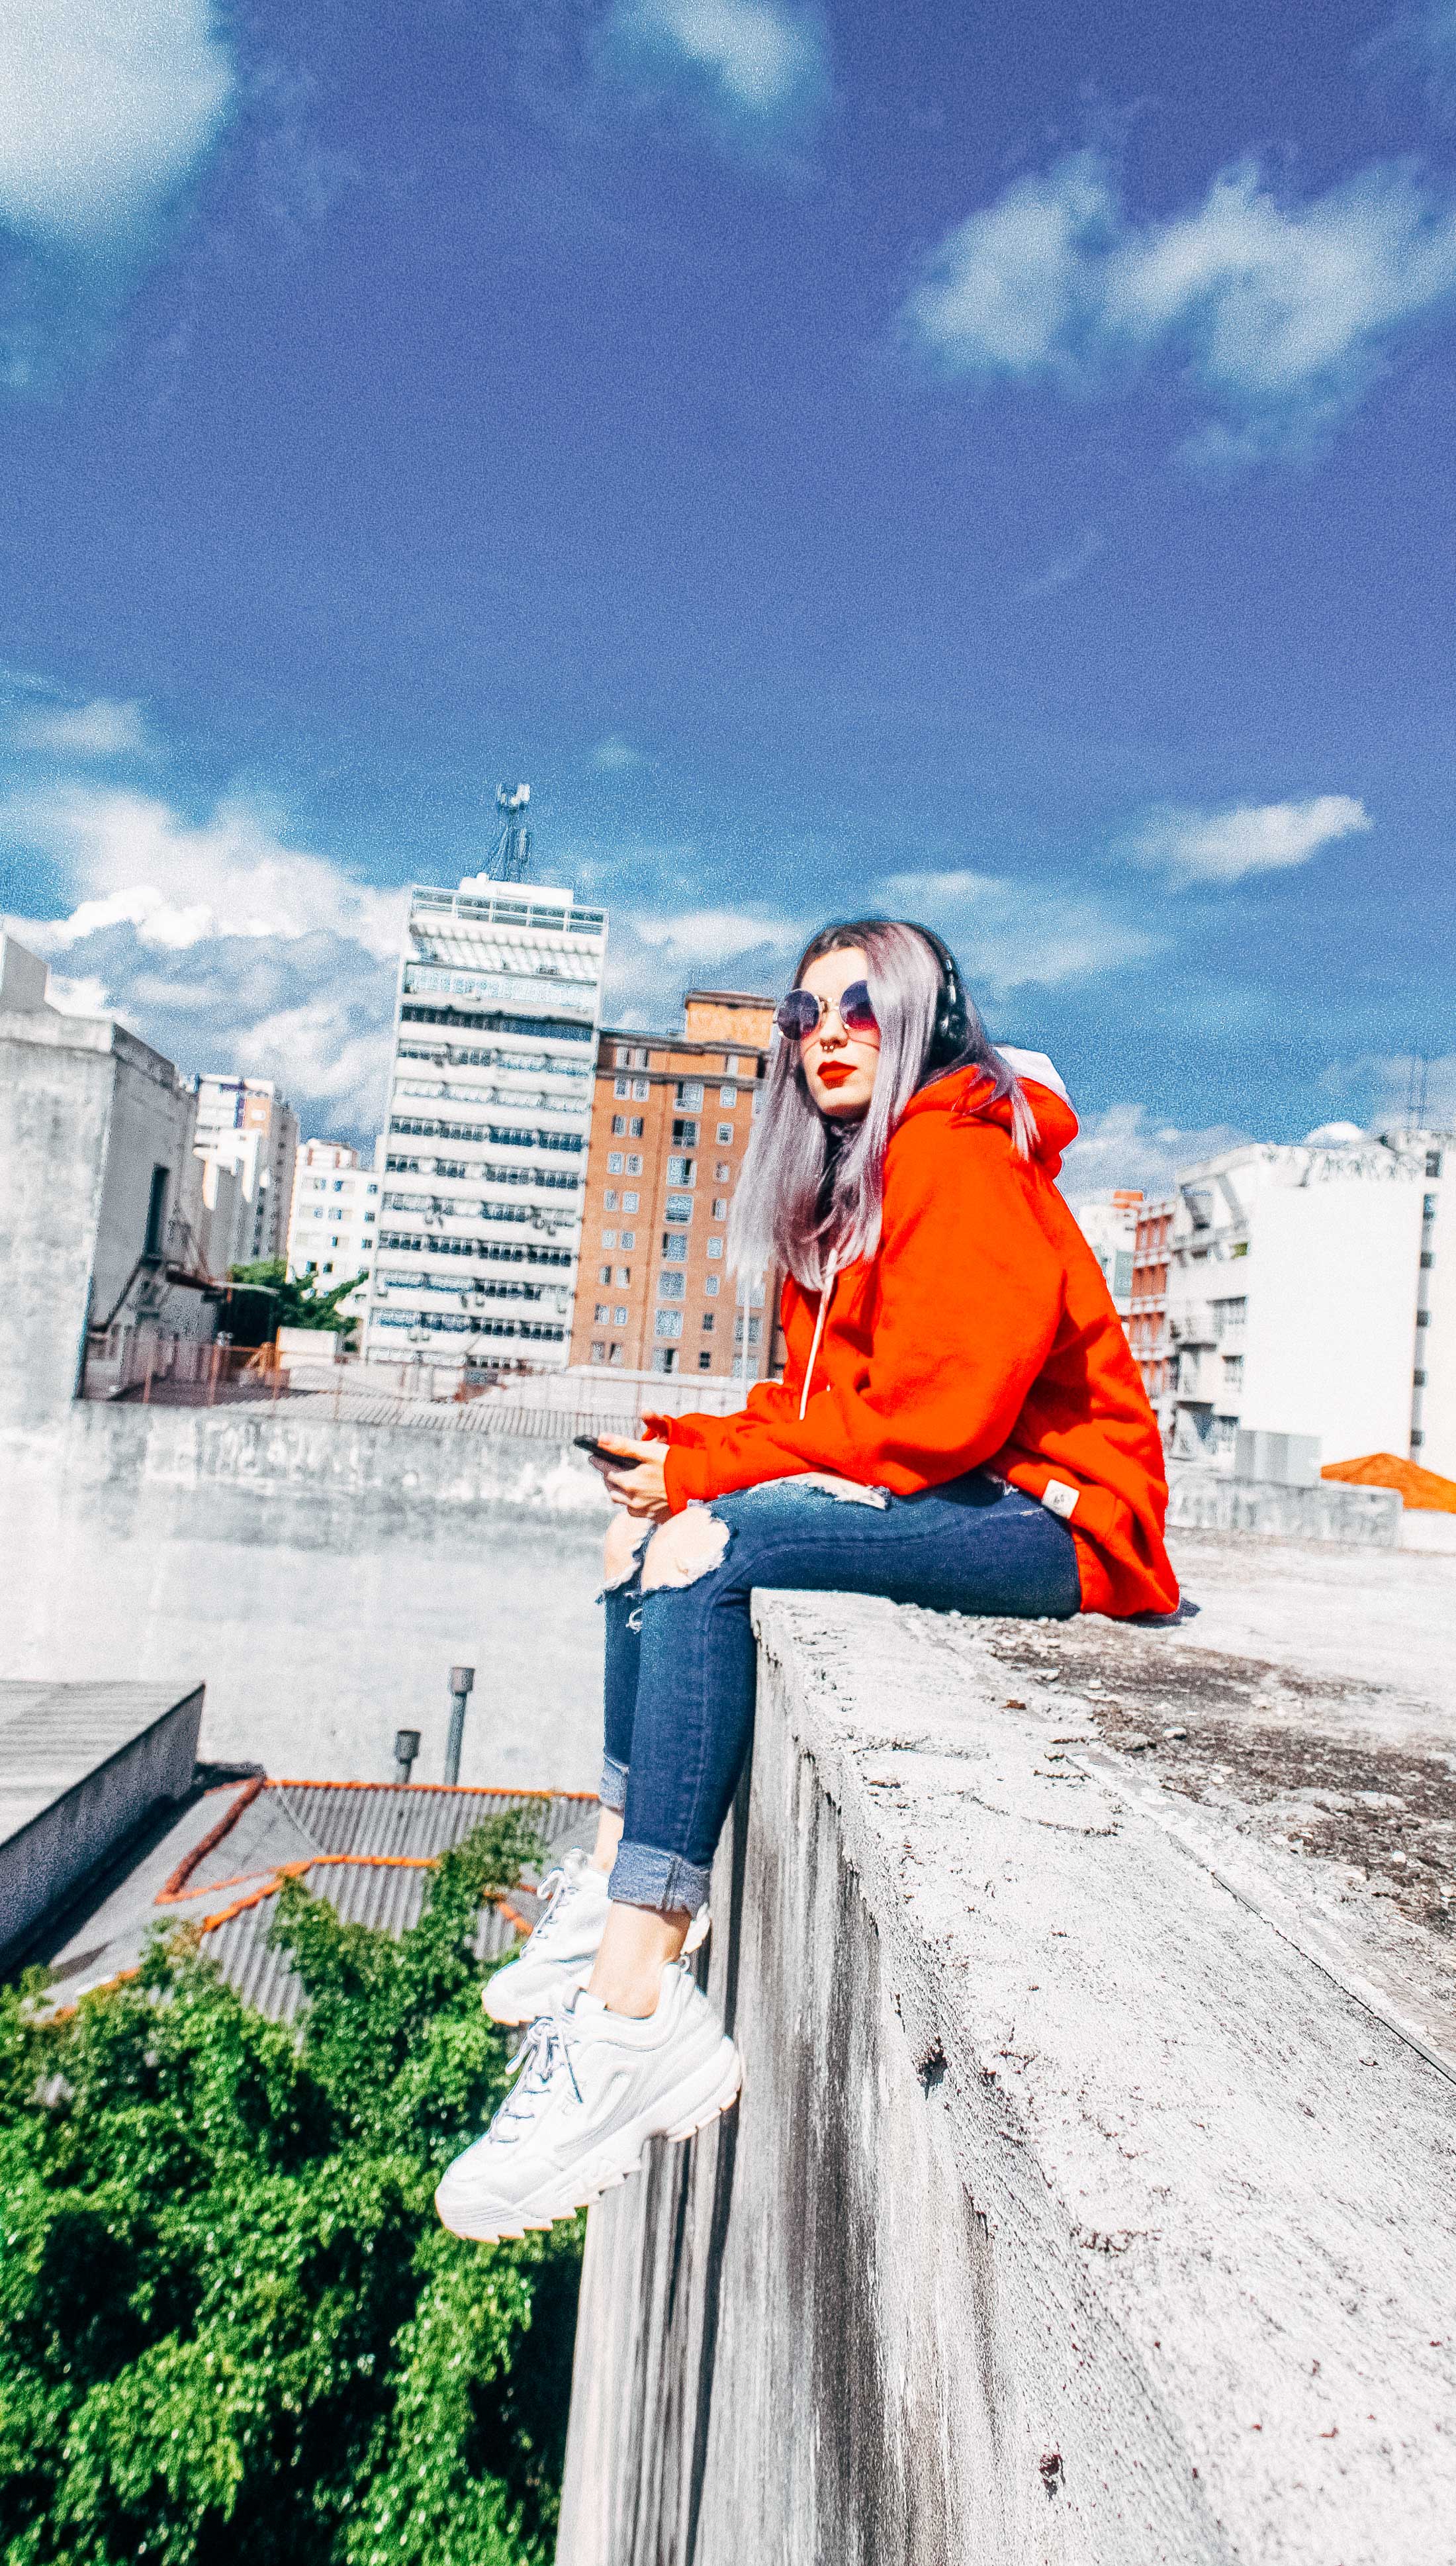 Woman sitting on a ledge facing the left, with tall buildings in the background. Below her feet are green trees. She is holding a phone or mp3 player.